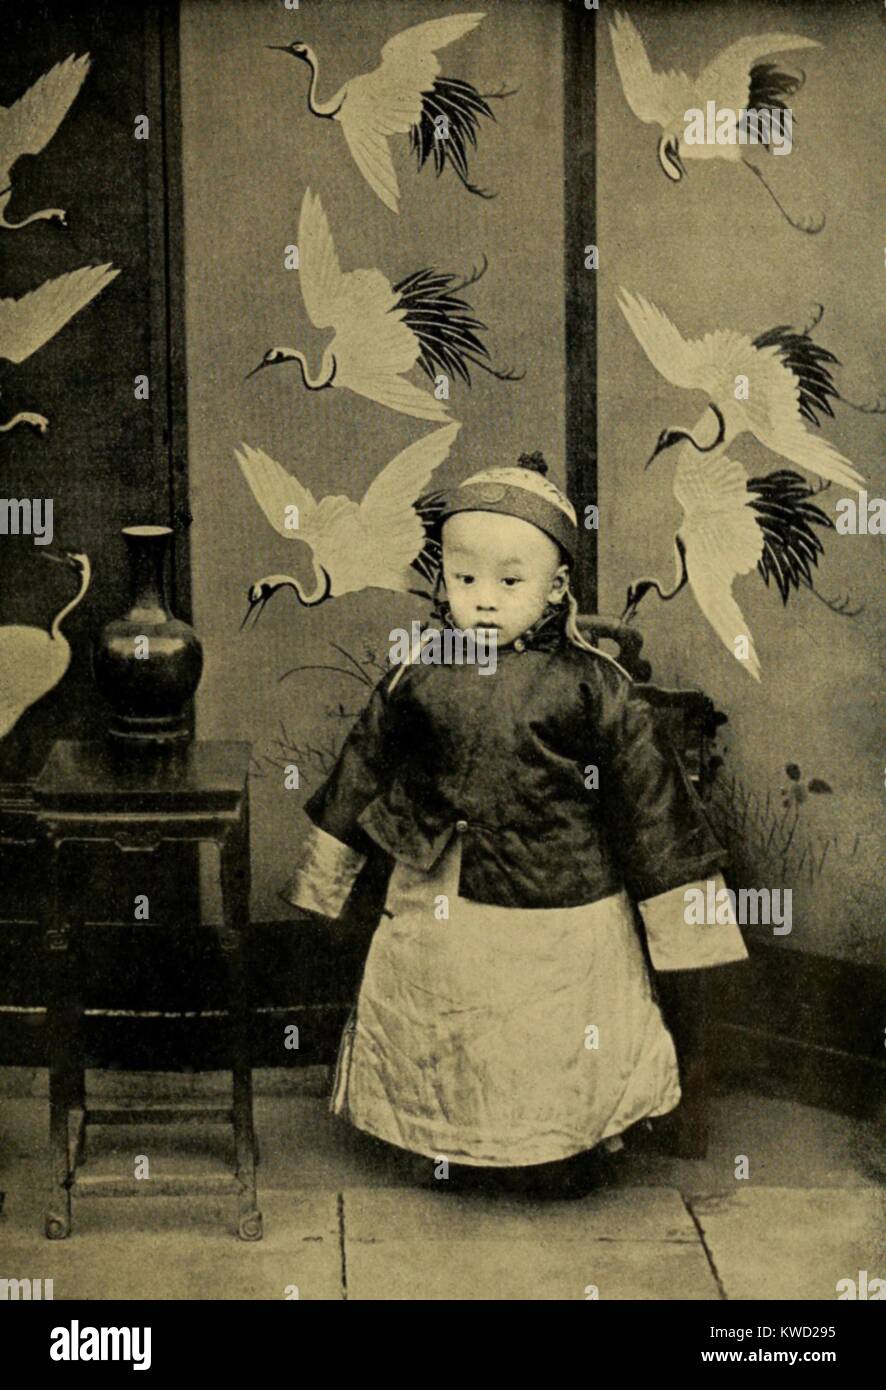 Xuantong Emperor, 3-year old Puyi, in 1909. In Feb. 1912, during the Xinhai Revolution, he was forced to force to abdicate. As an adult, he became the Kangde Emperor, Japanese puppet of Manchukuo, during the Second Sino-Japanese War and World War 2. His life was the subject of the 1987 film, THE LAST EMPEROR, by Bernardo Bertolucci  (BSLOC 2017 20 6) Stock Photo